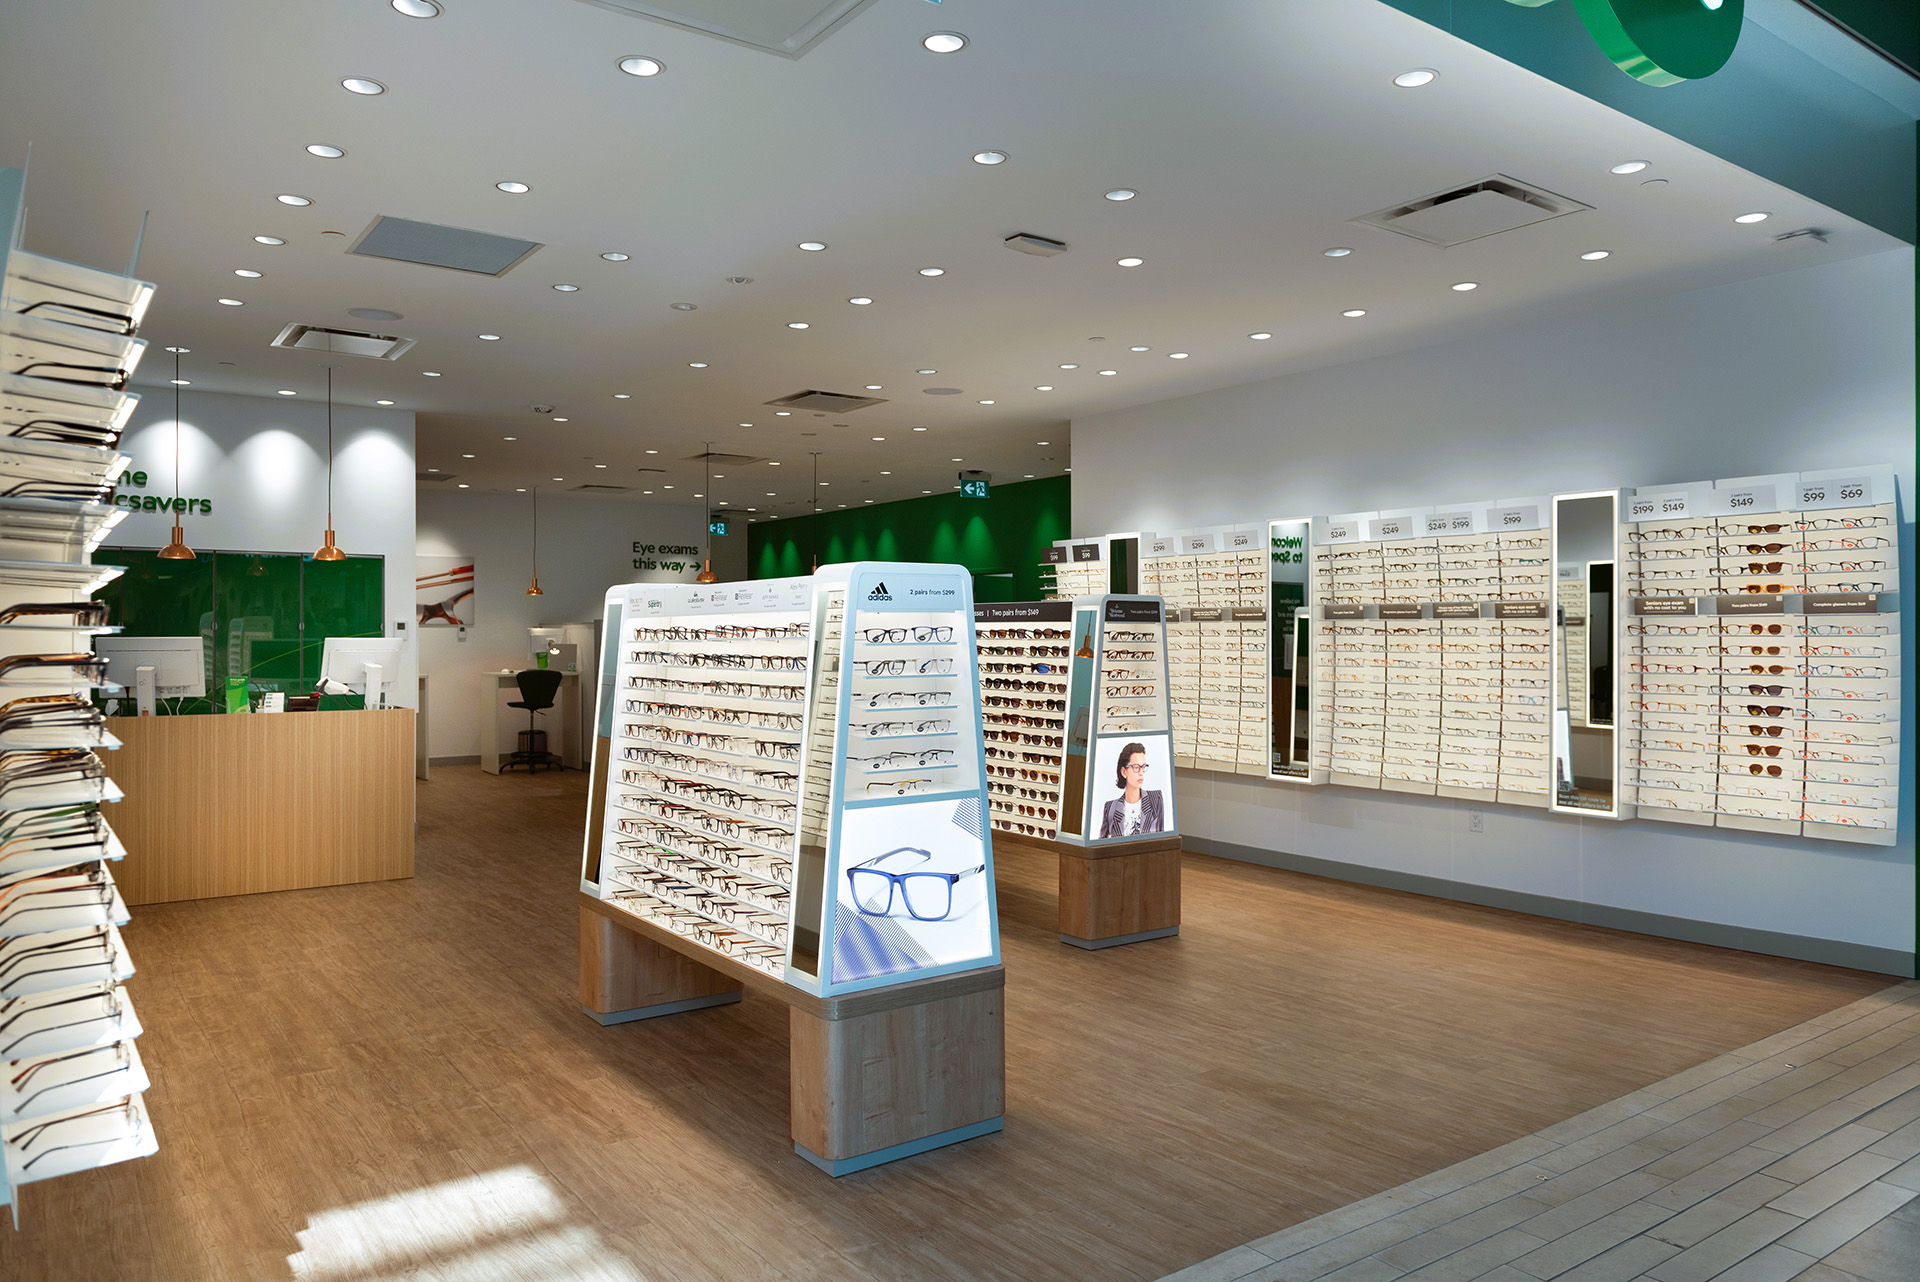 Images Specsavers Kingsway Mall